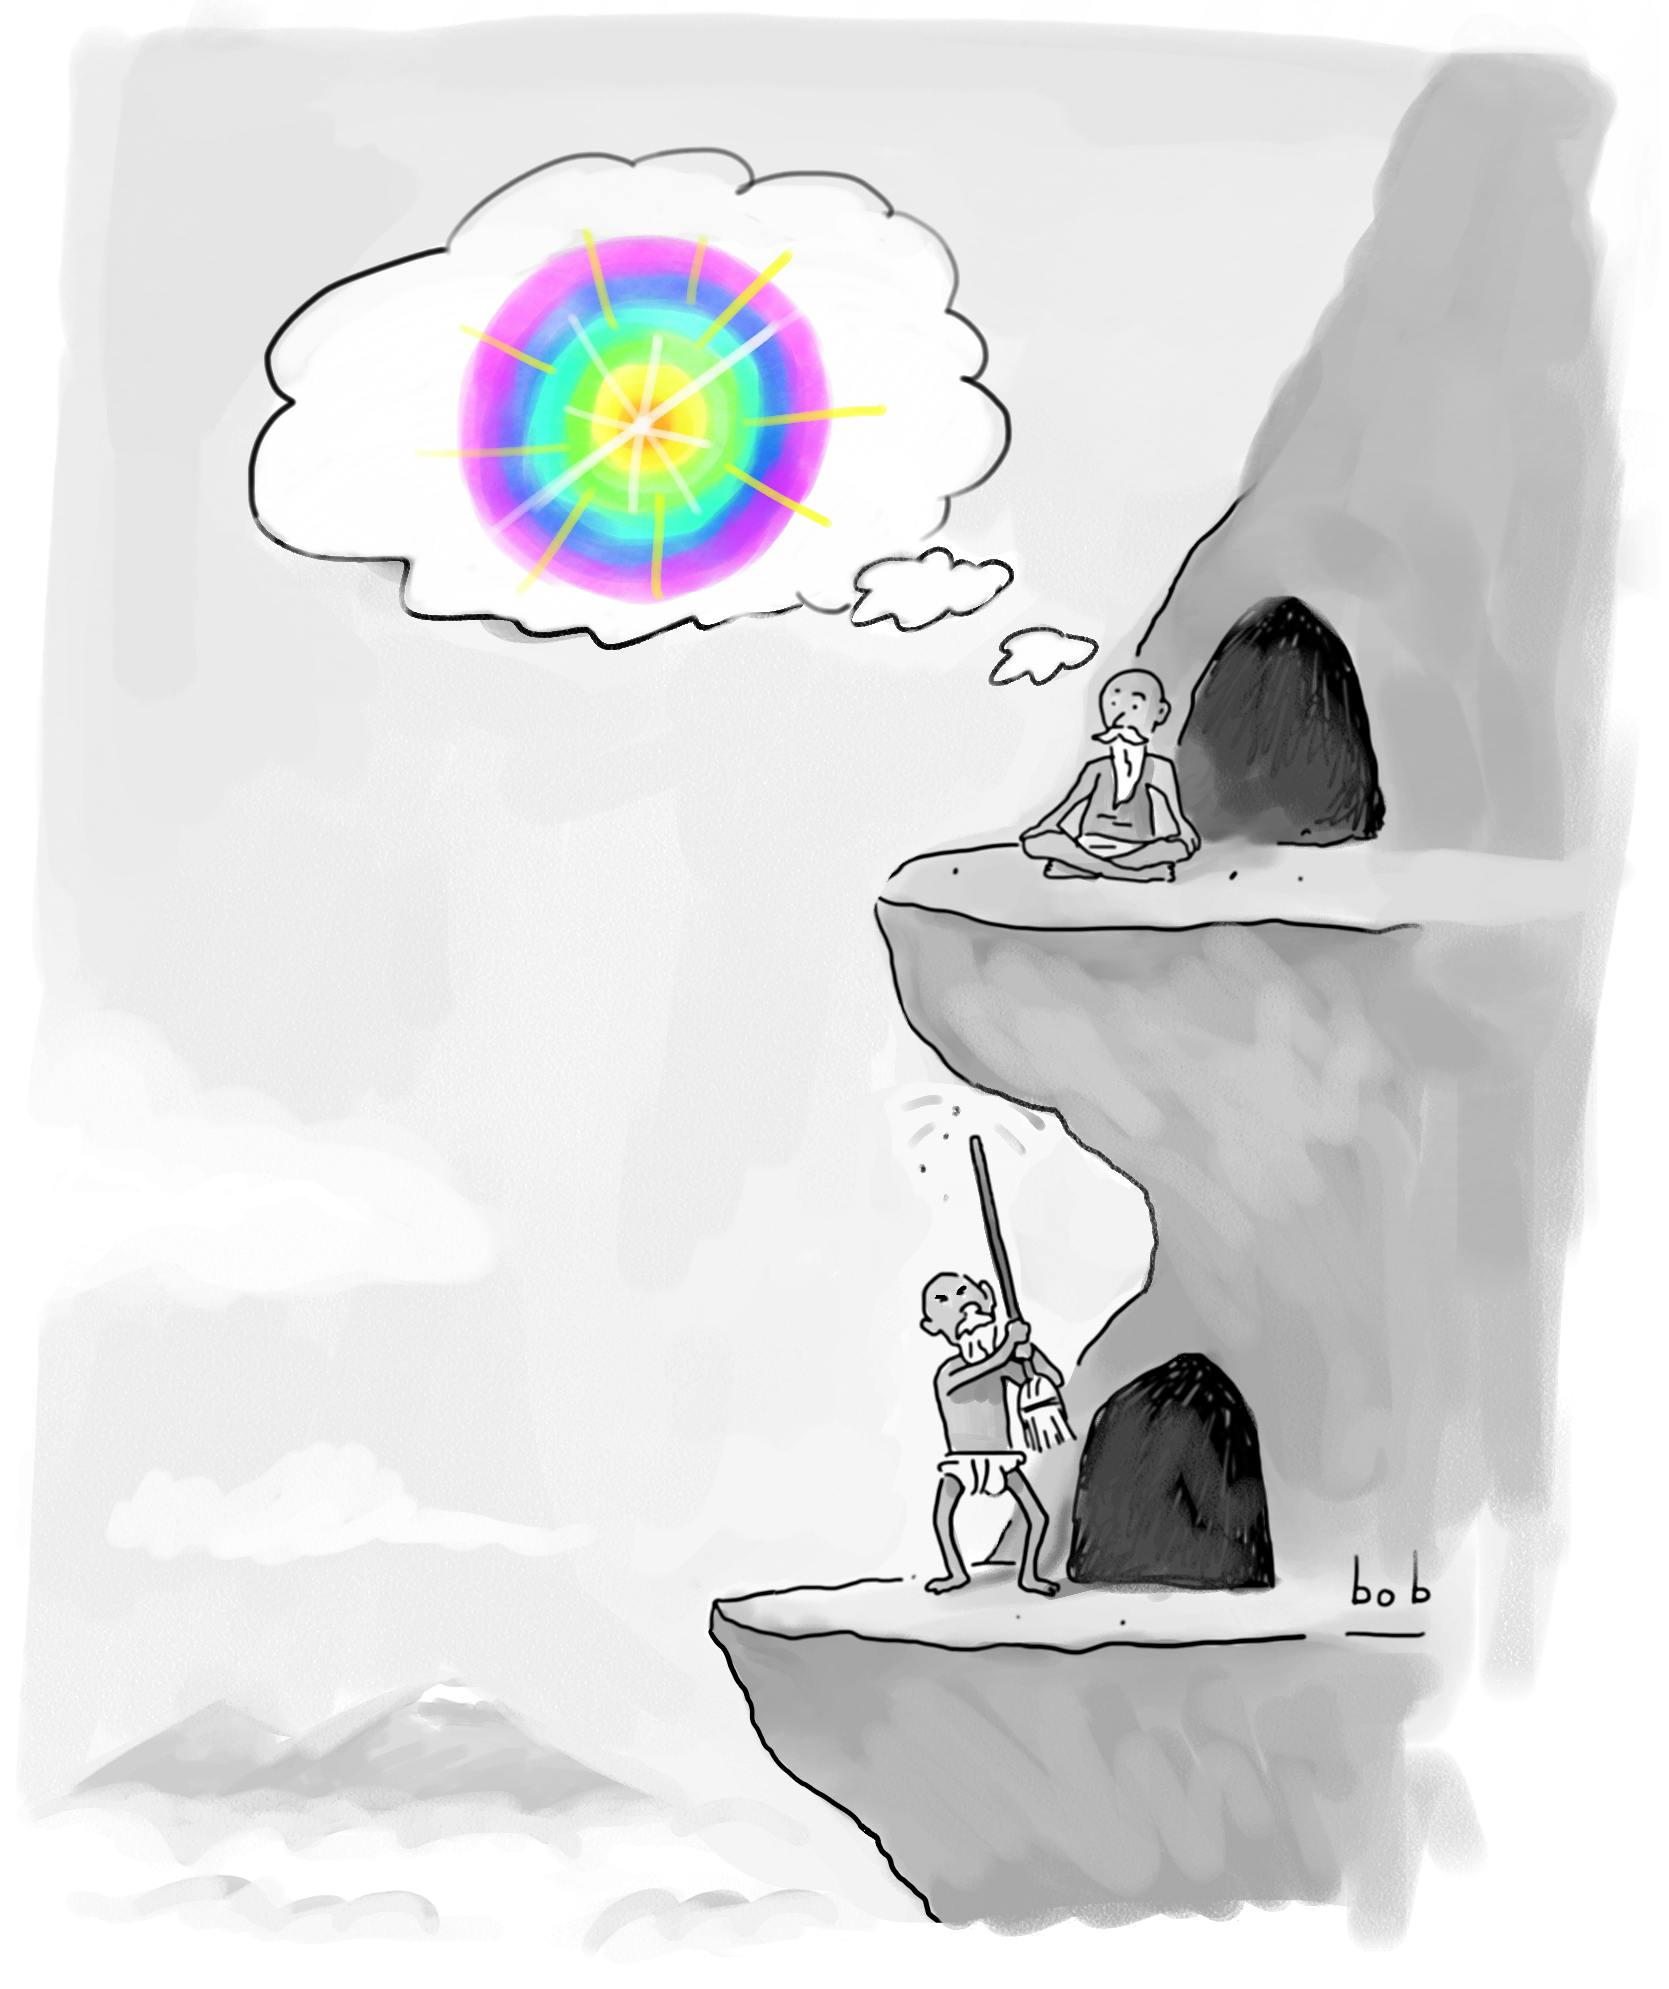 Cartoon by Bob Eckstein: two gurus live in separate mountaintop caves, one immediately above the other. The topmost one sits on his ledge, with a thought bubble illustrating a spectacular multi-colored ball representing enlightenment. Below, the other guru uses a broom handle to bang against the underside of the ledge above him.